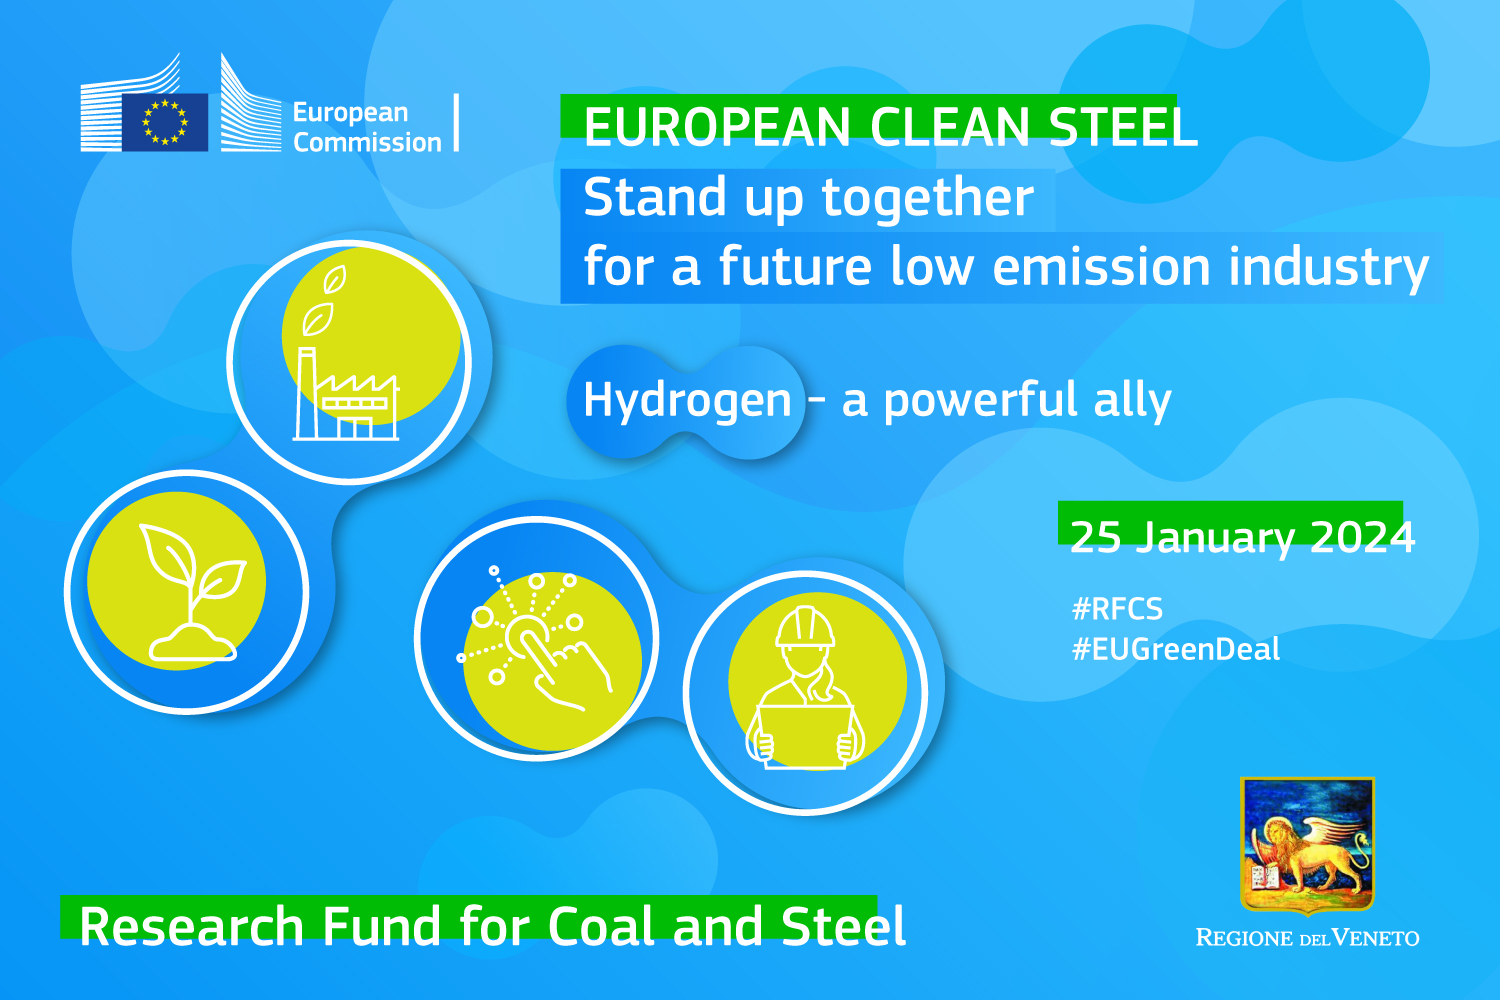 Abstract visual for the European Clean Steel event